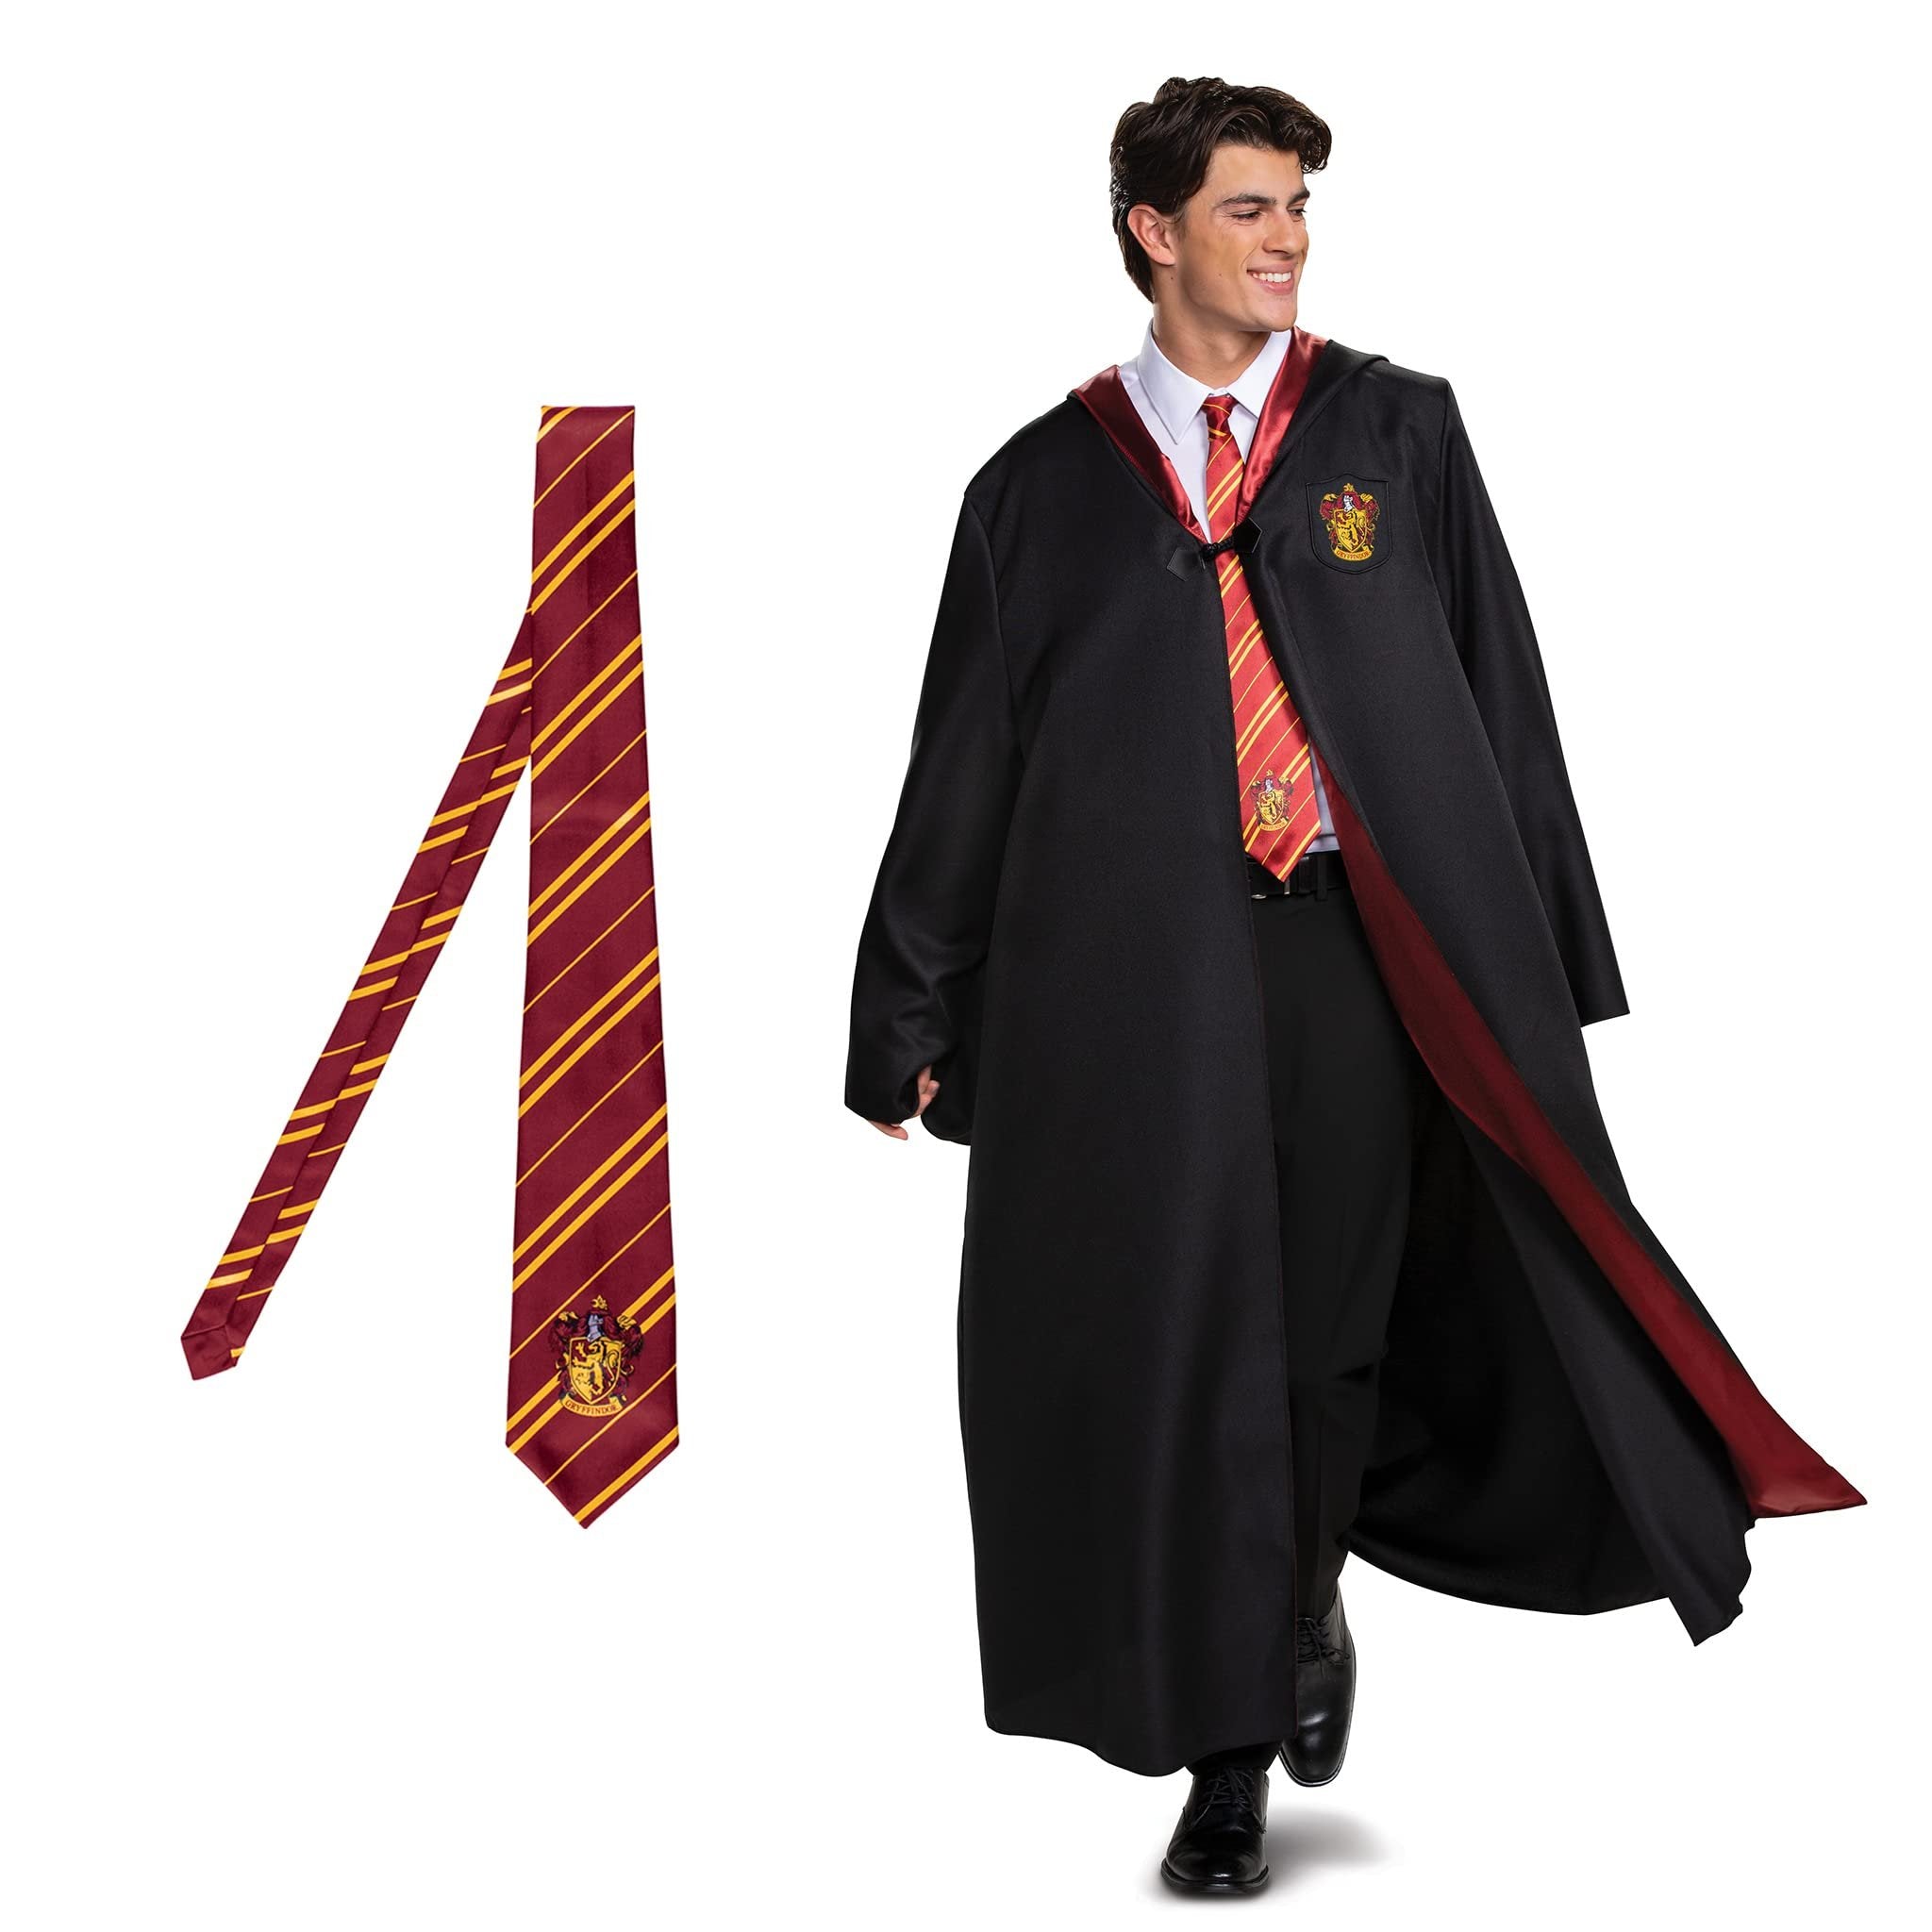 Disguise Harry Potter Gryffindor Costume Combo, Deluxe Hooded Robe with Tie for Adults, As Shown, Large (42-46)